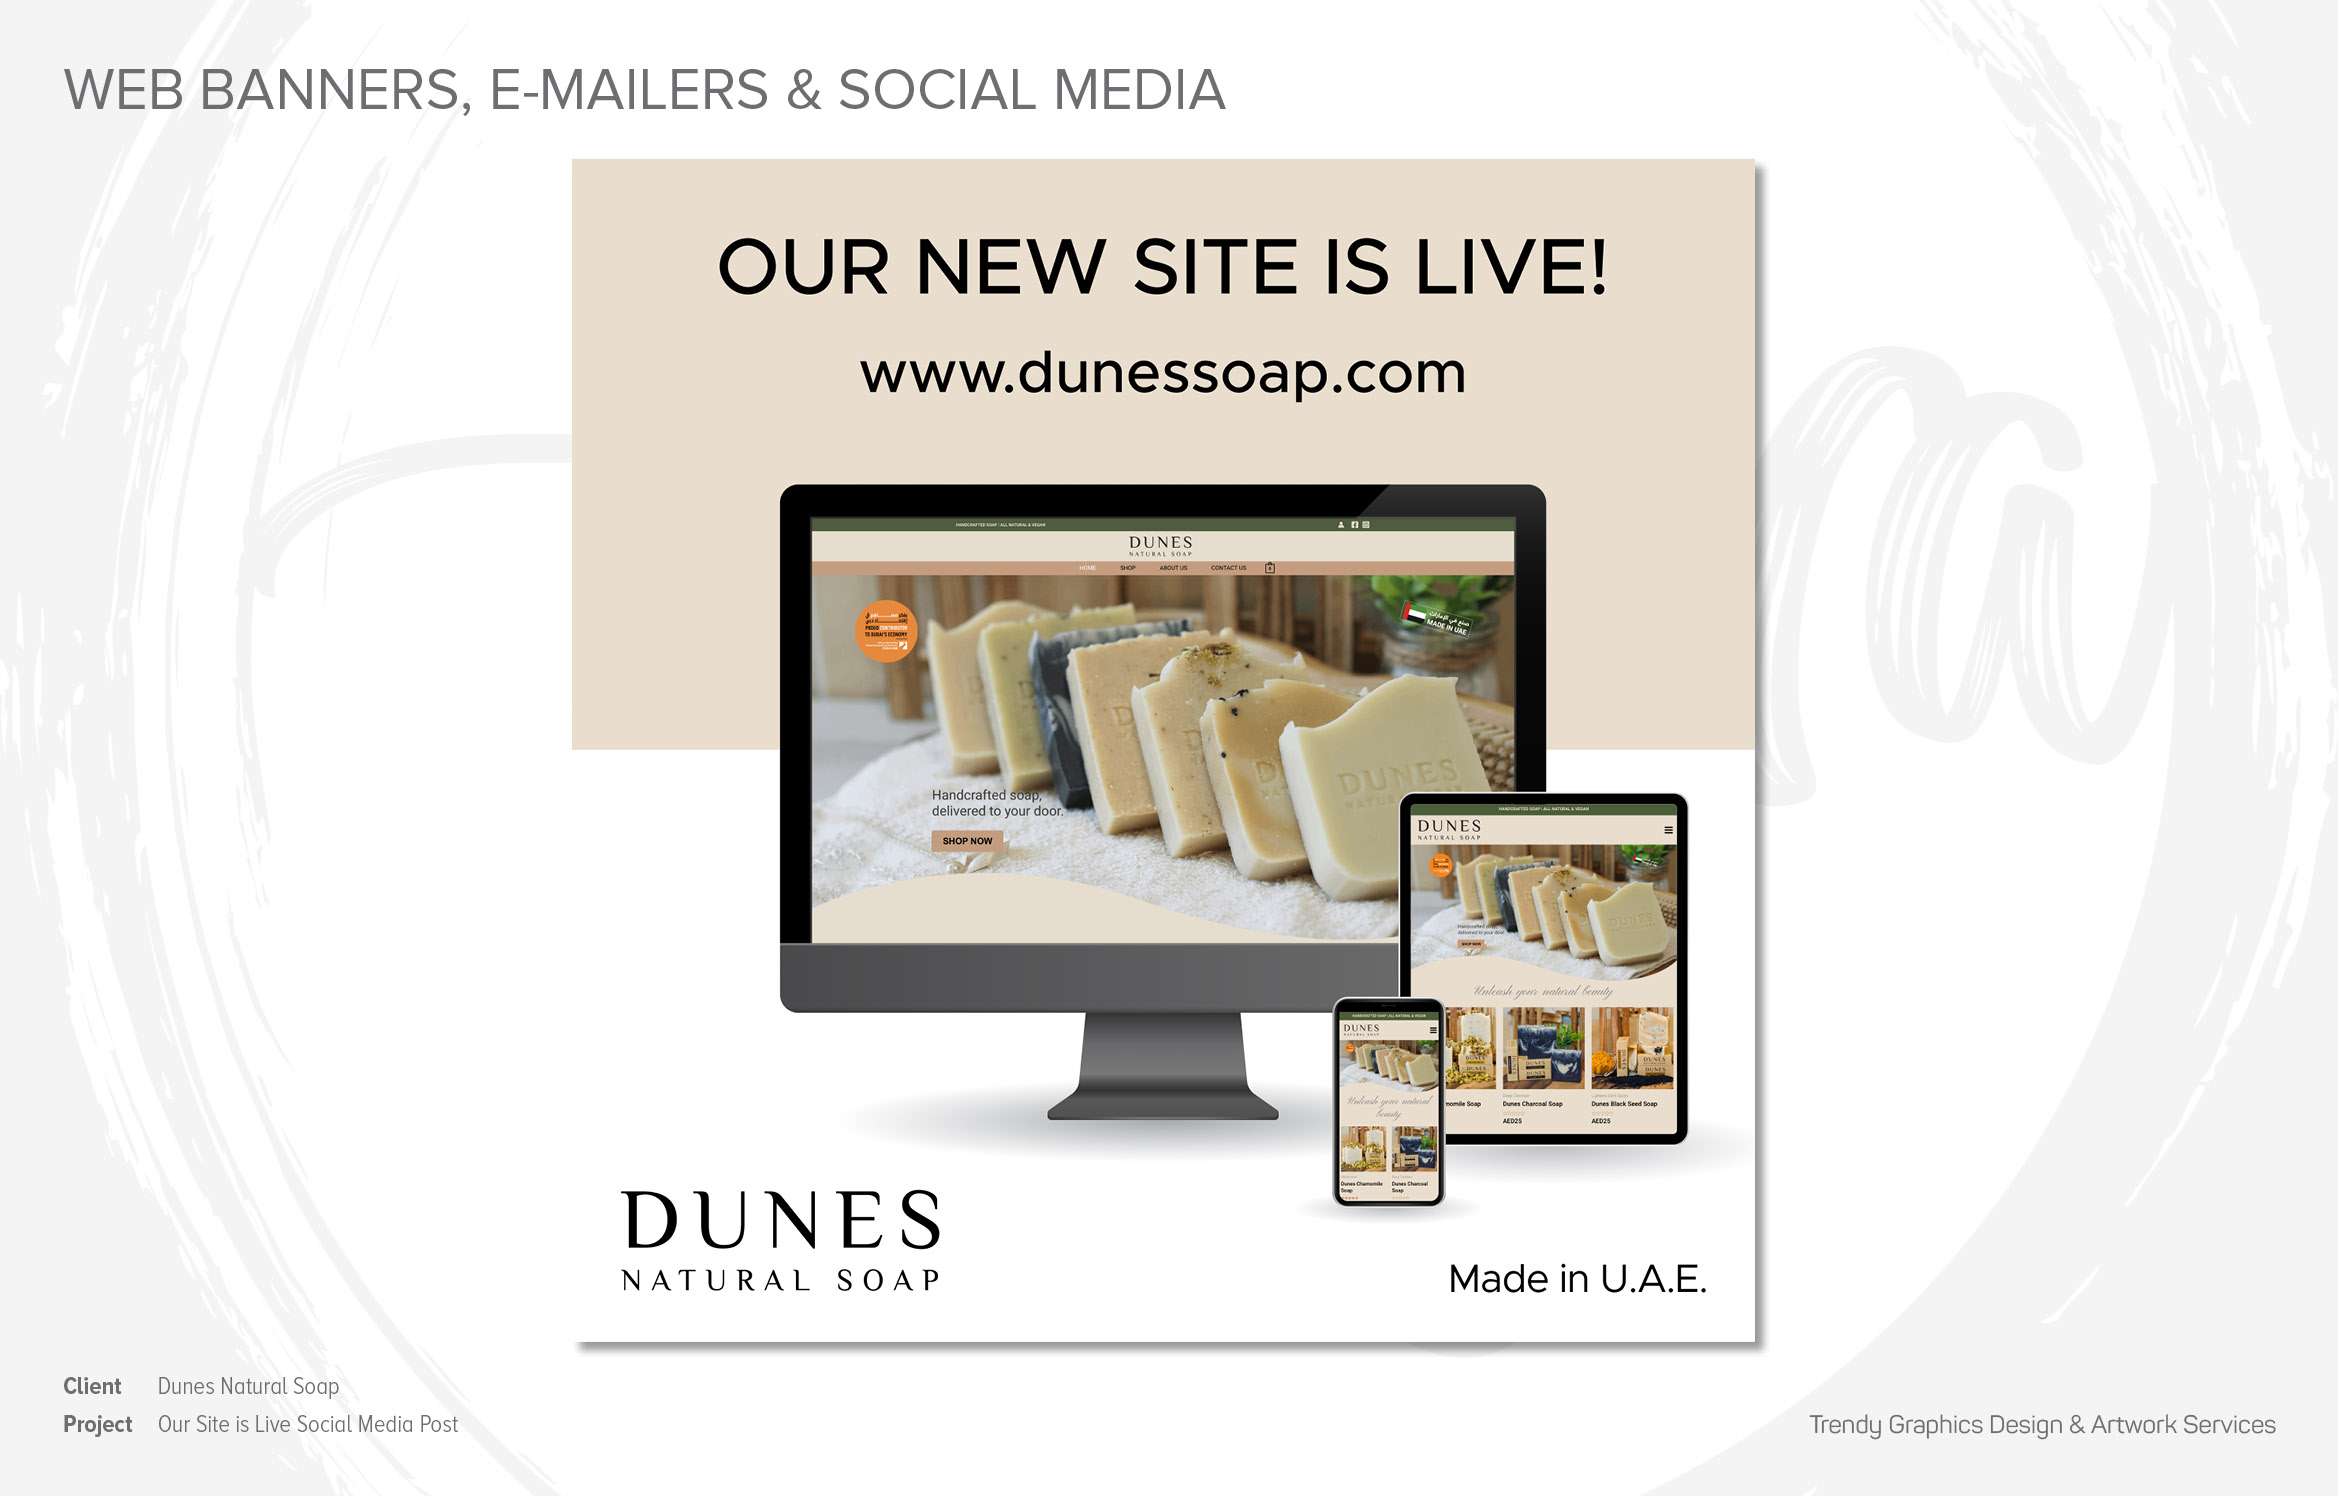 Dunes Natural Soap – Our Site is Live Social Media Post